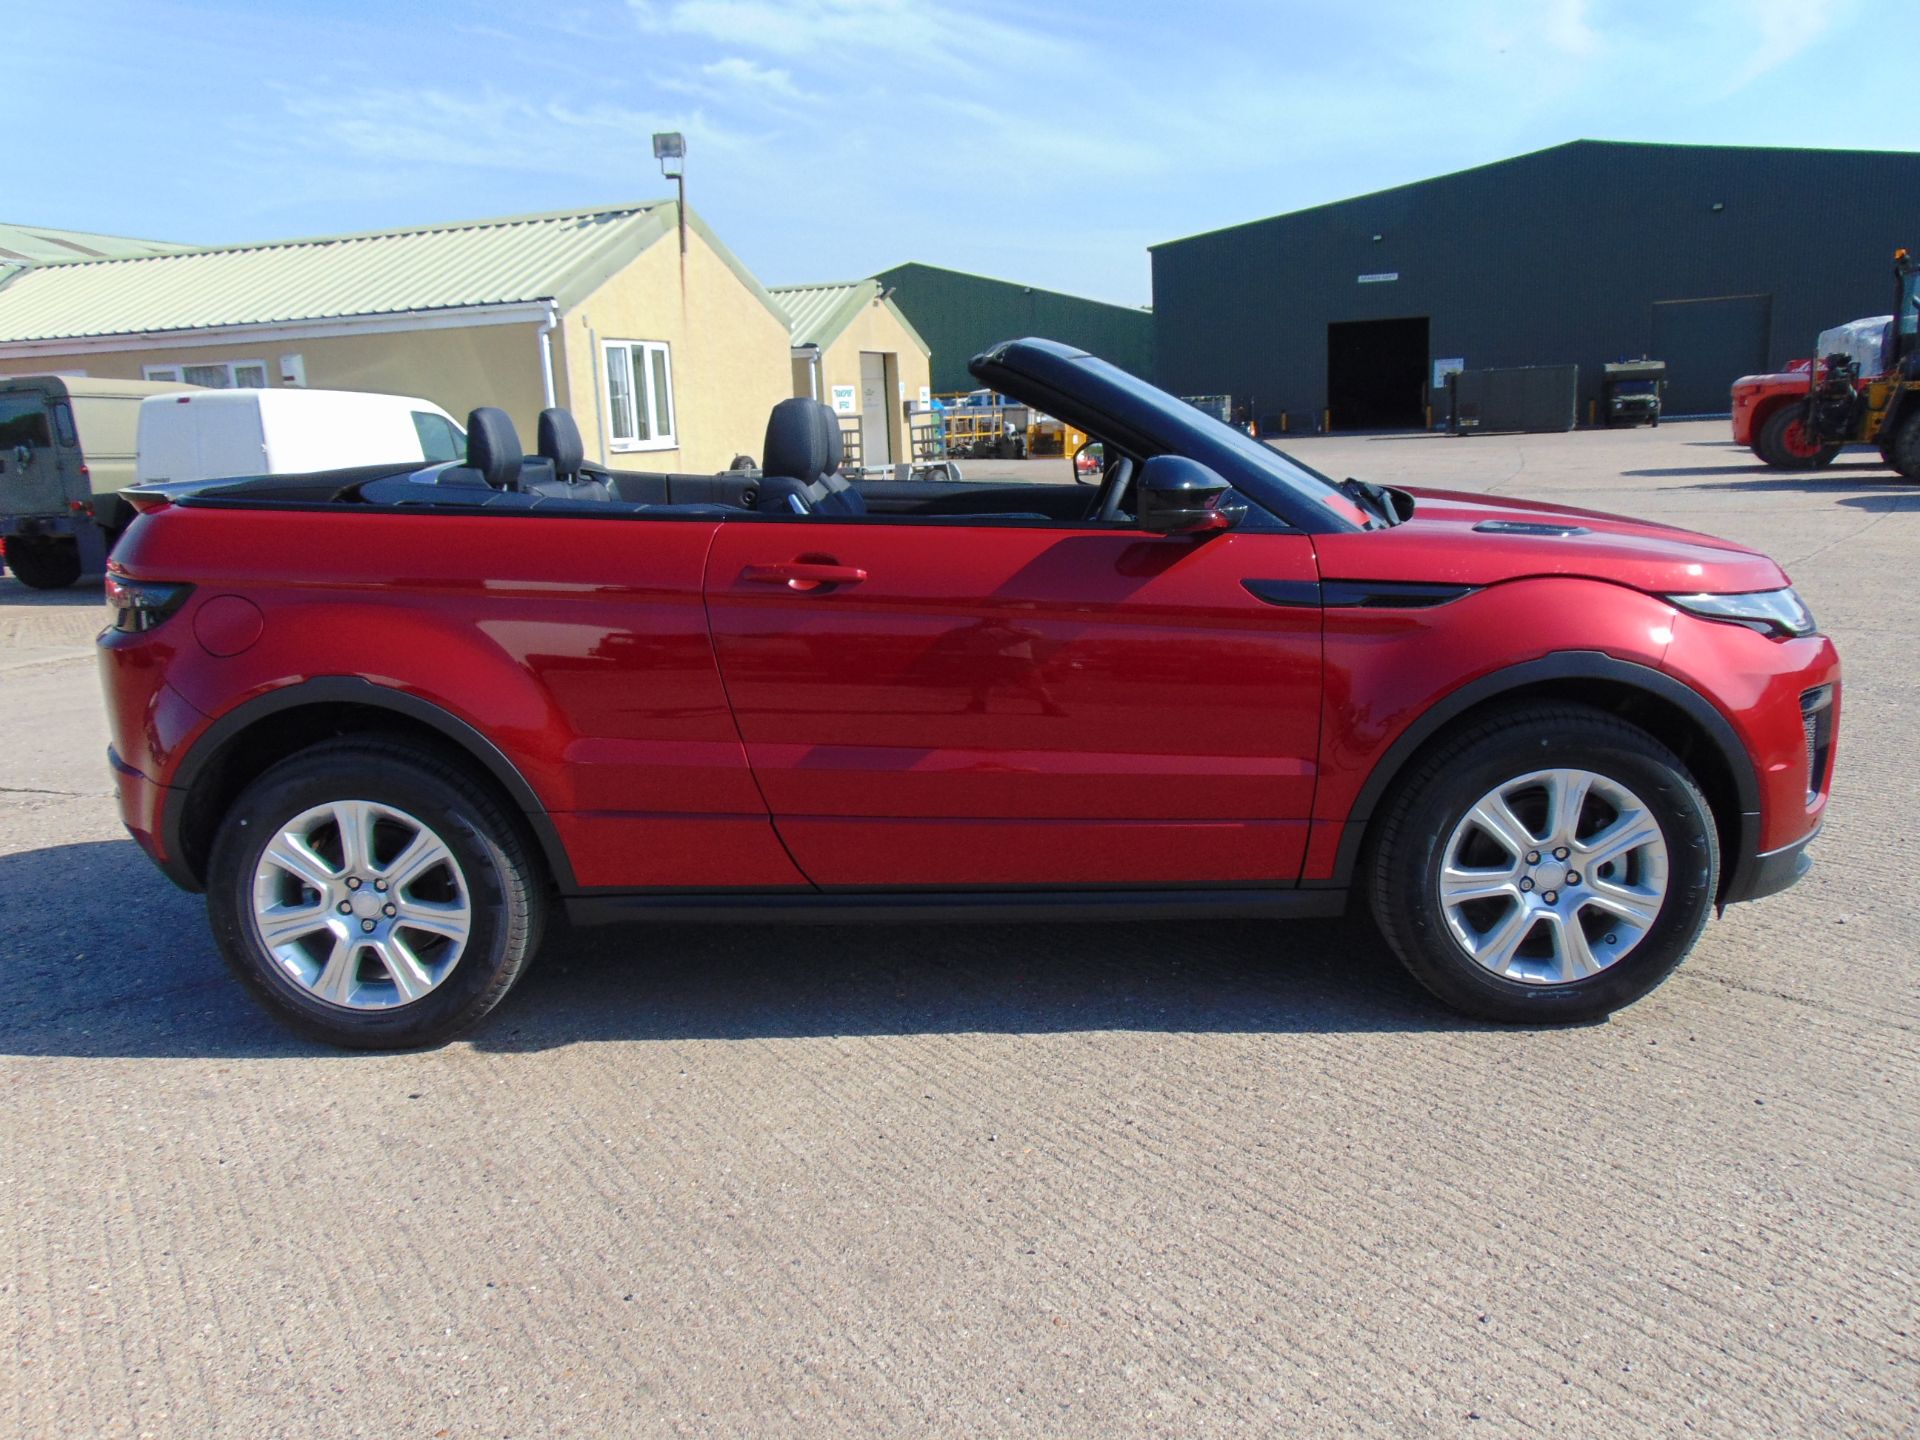 NEW UNUSED Range Rover Evoque 2.0 i4 HSE Dynamic Convertible - Image 6 of 39